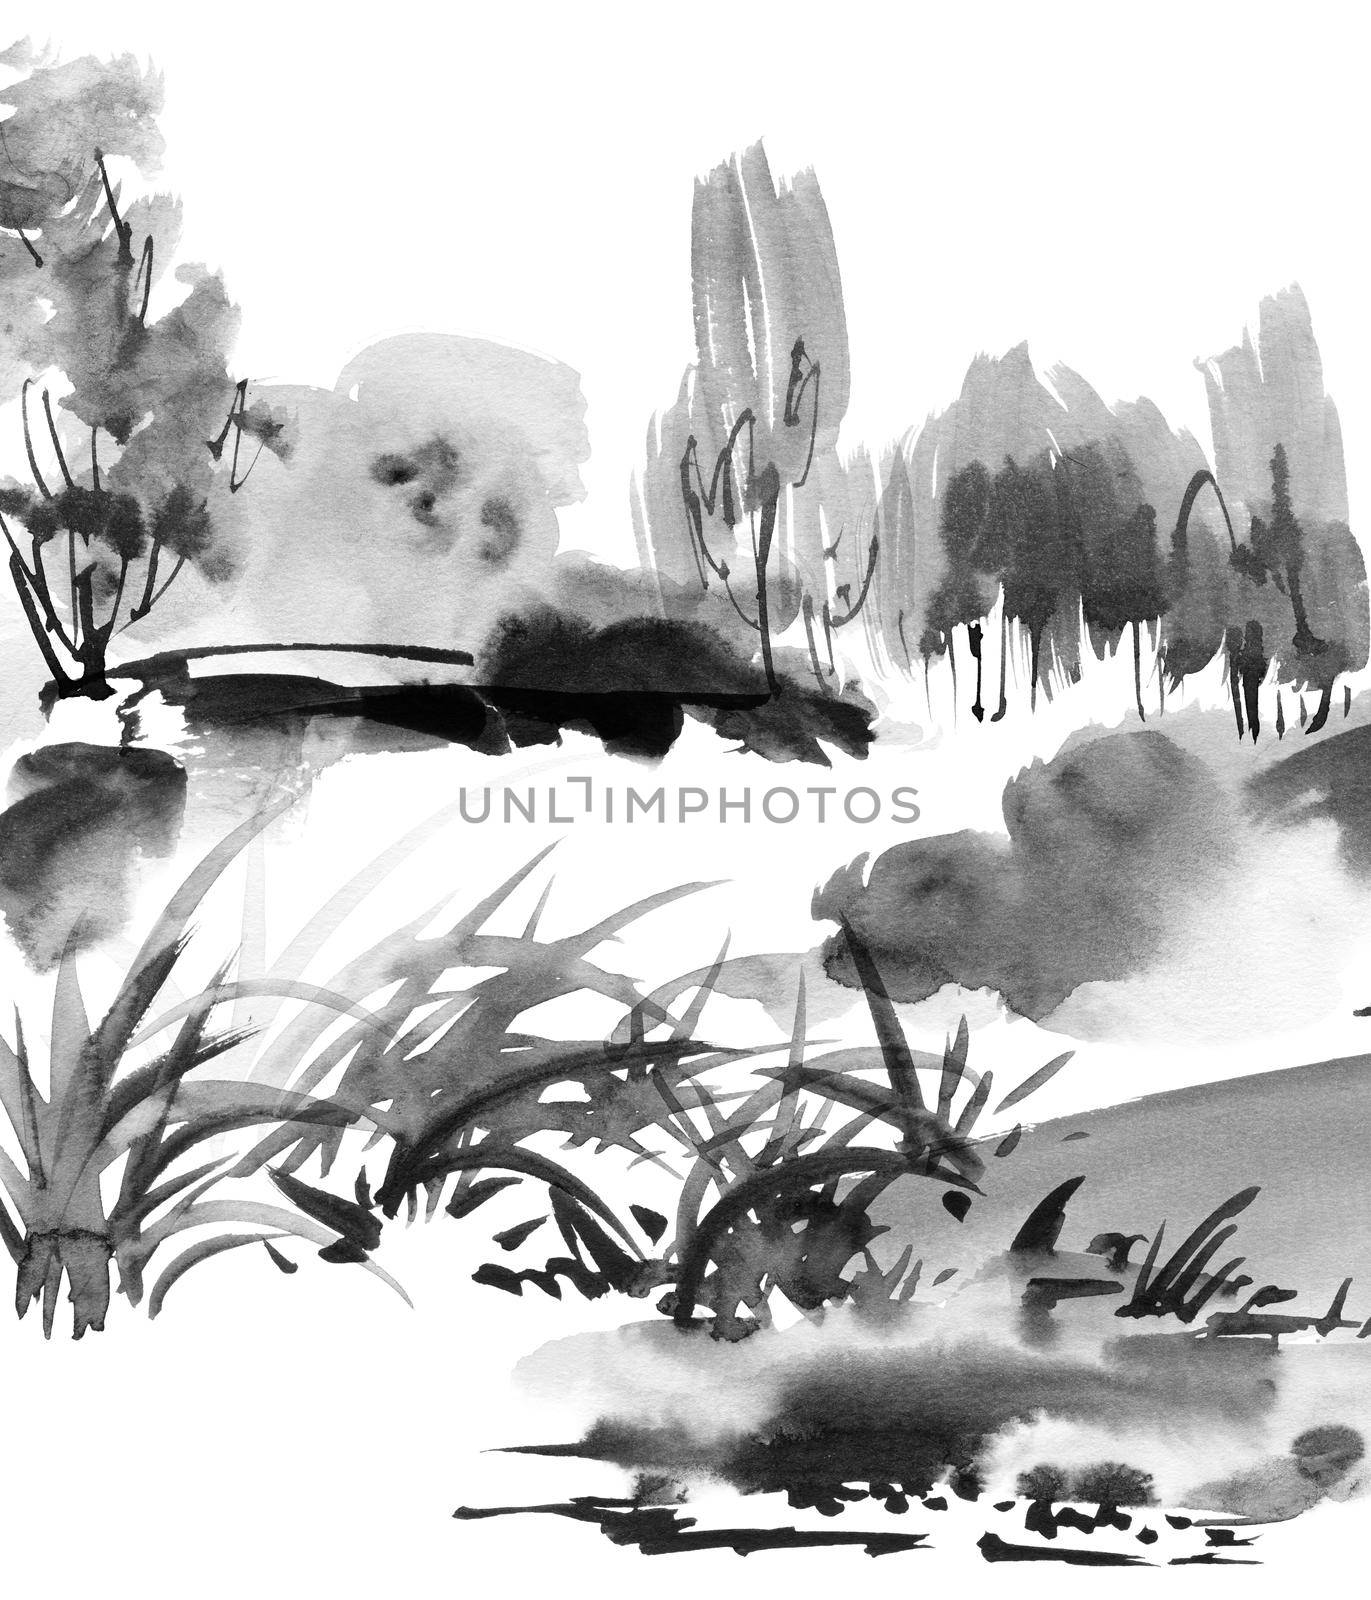 Ink painting of landscape with pagoda and some greenery. Oriental traditional painting in style sumi-e.